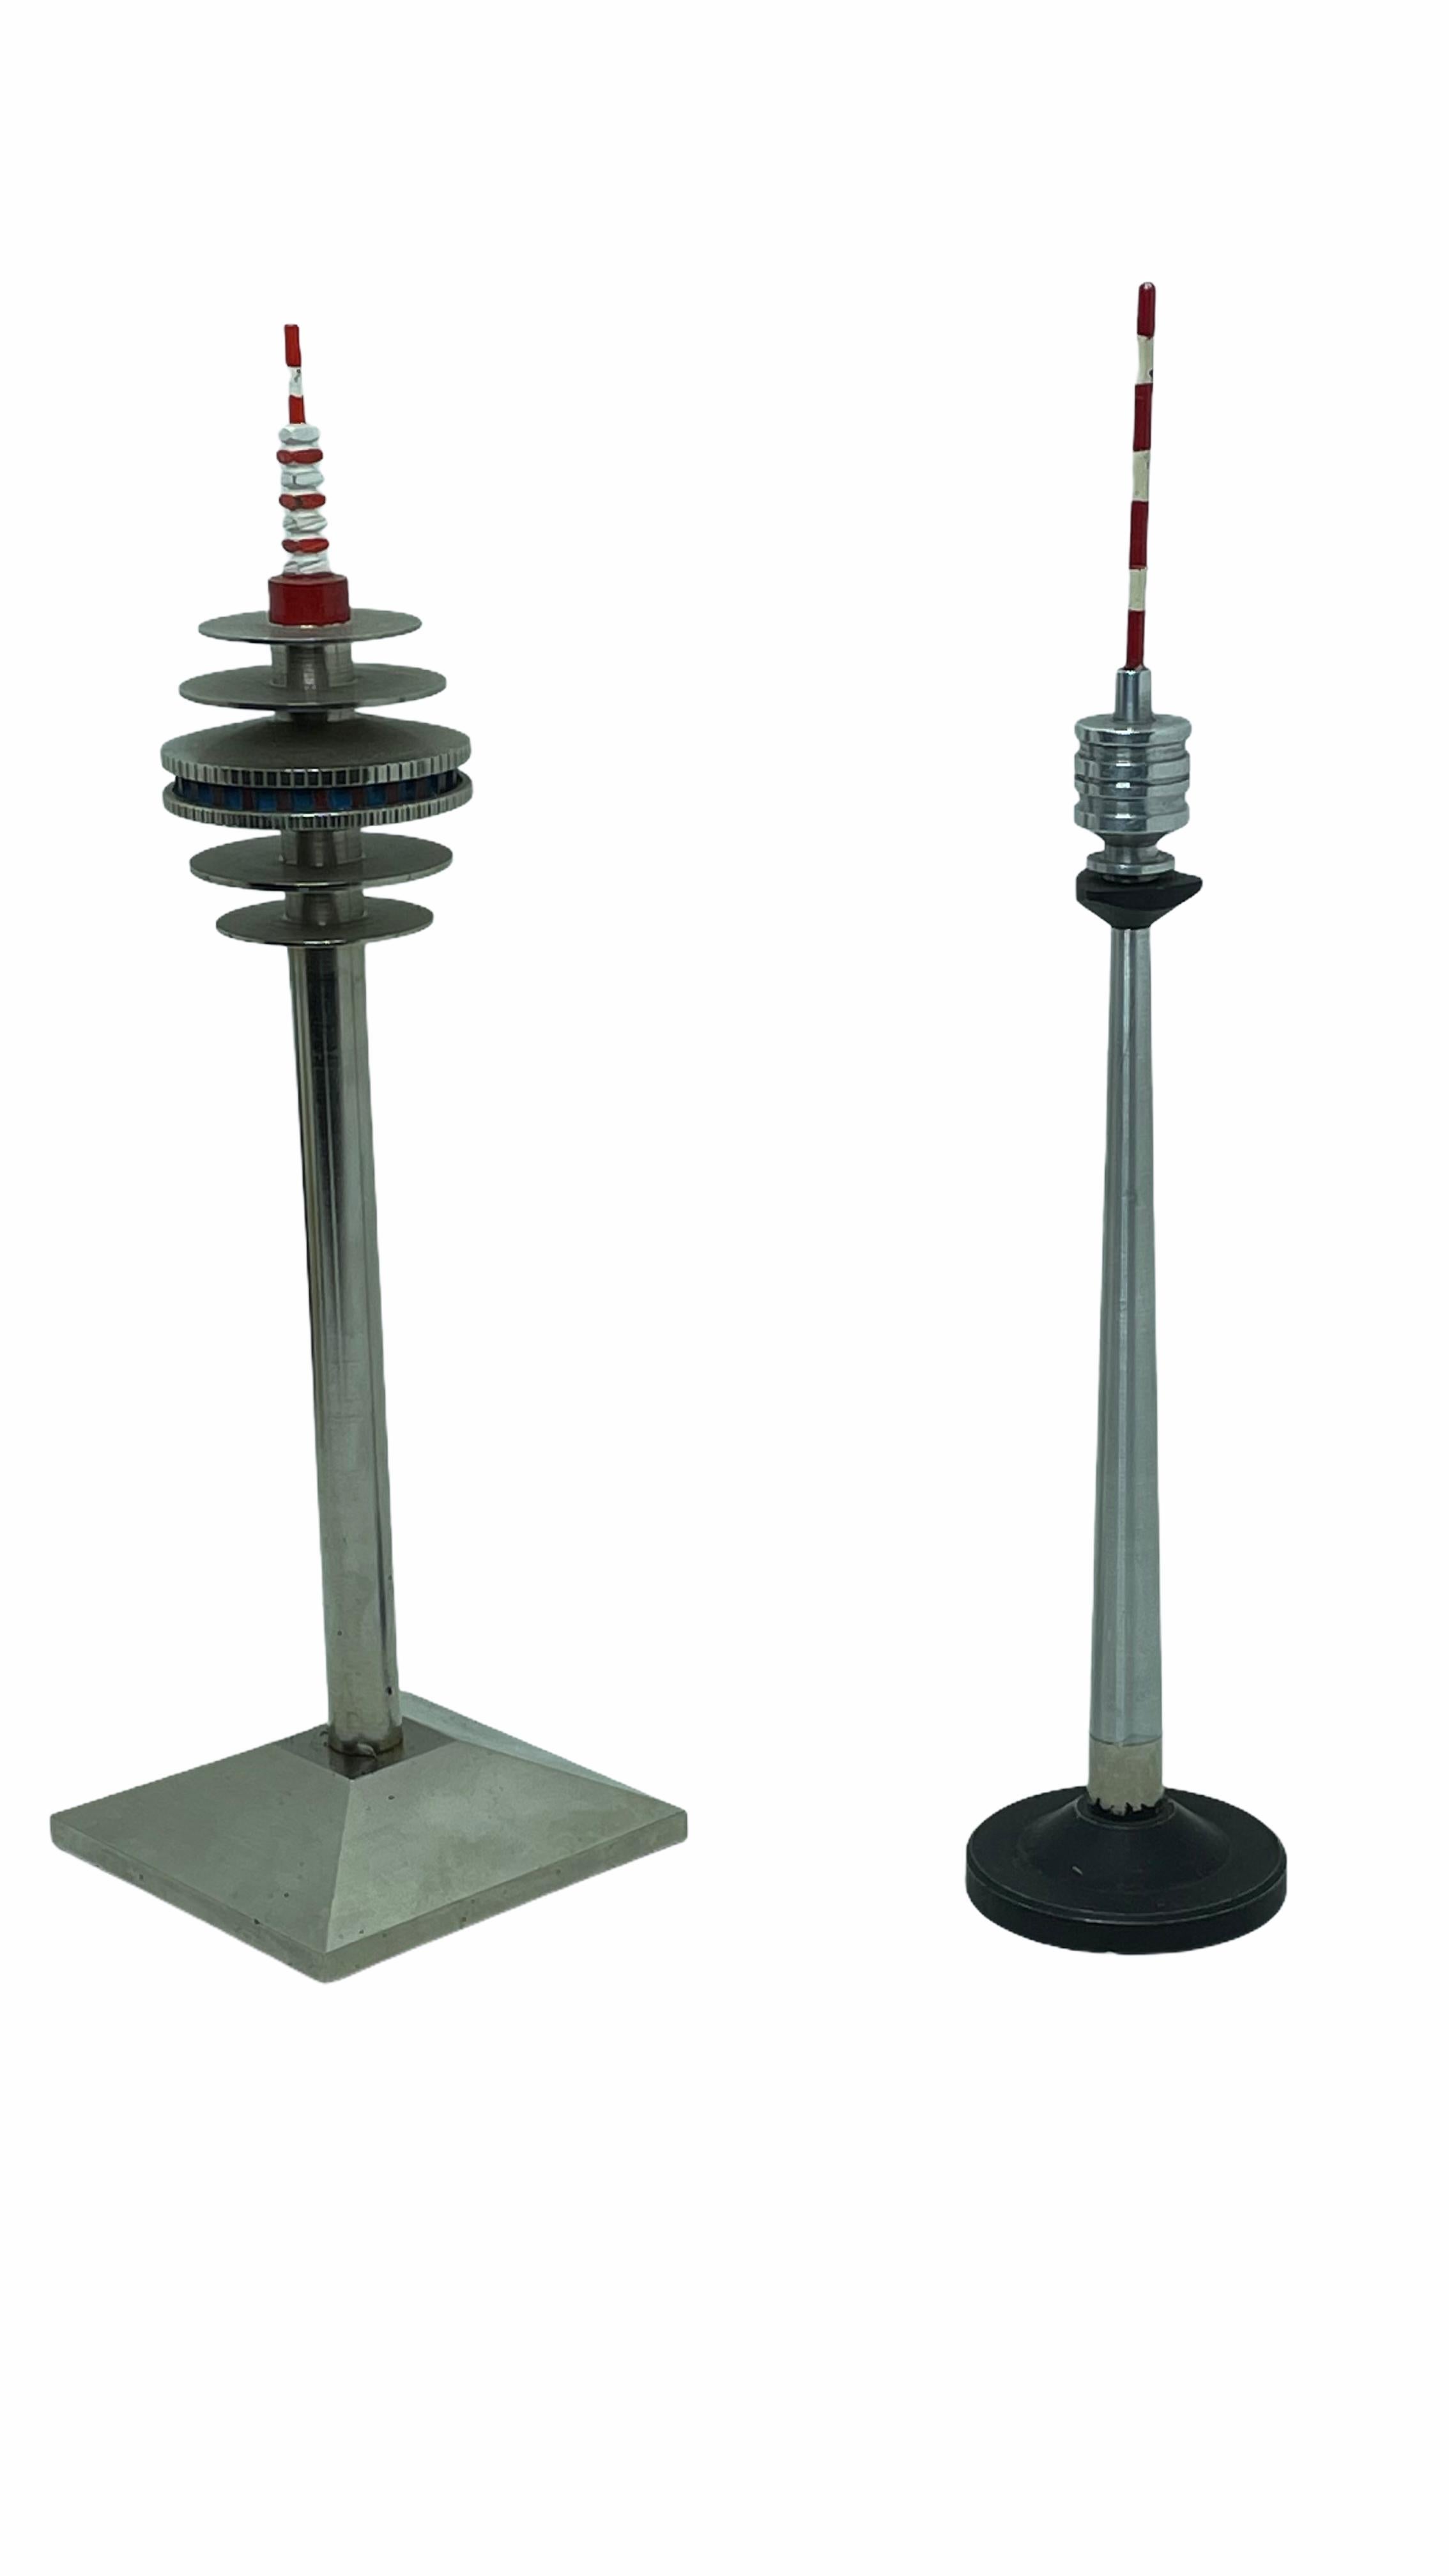 Austrian Set of Two Metal TV Television Tower Scale Design Models, Vienna Austria, 1970s For Sale